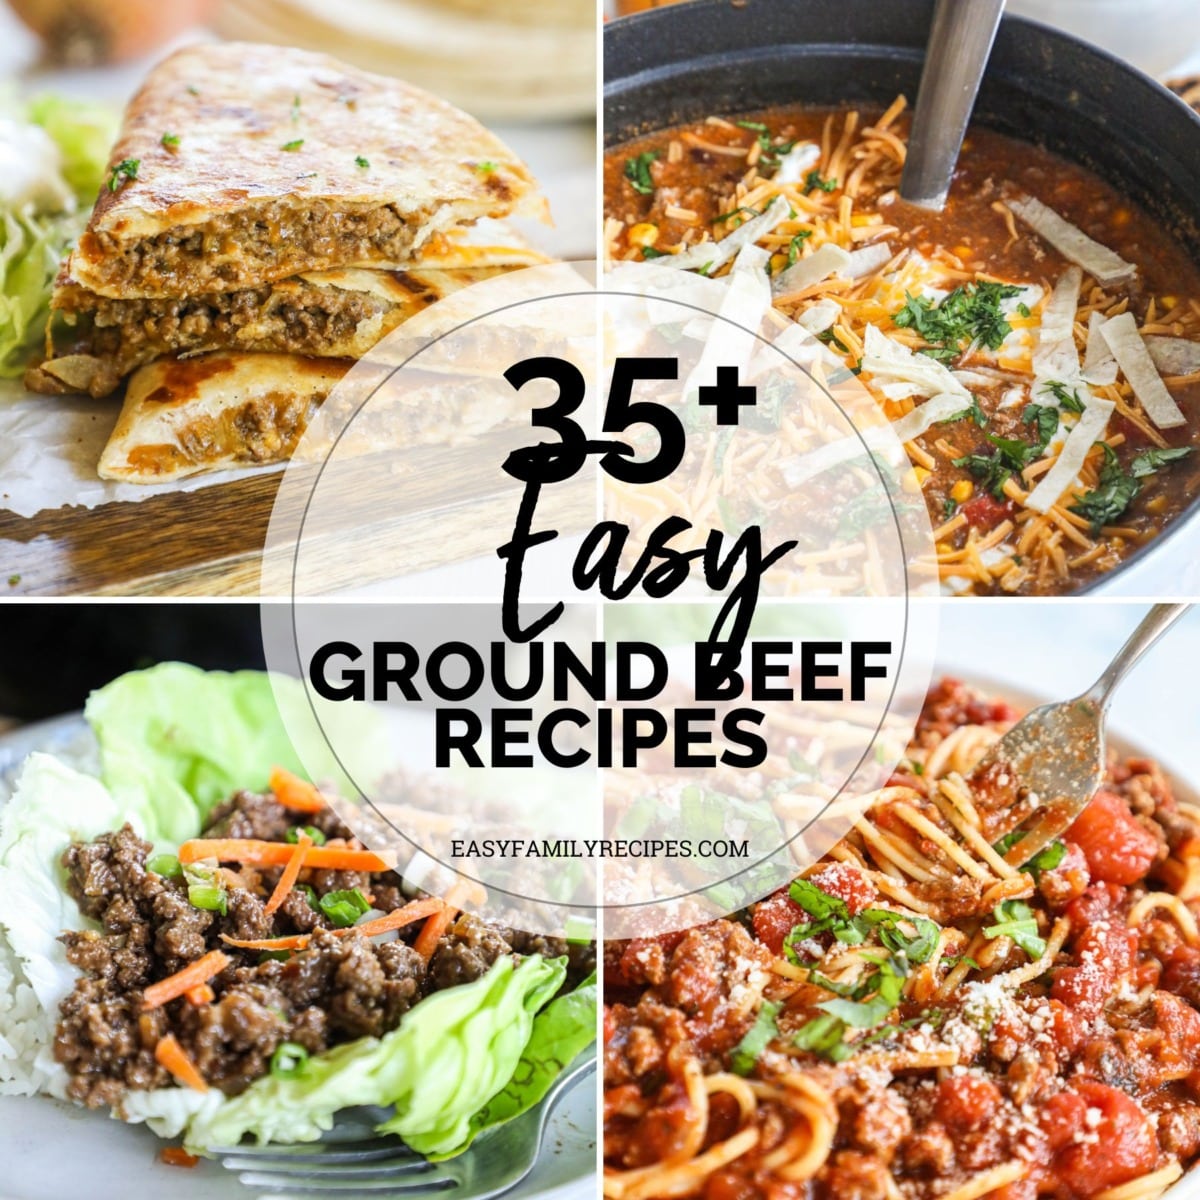 35+ Easy Ground Beef Recipes with a Few Ingredients